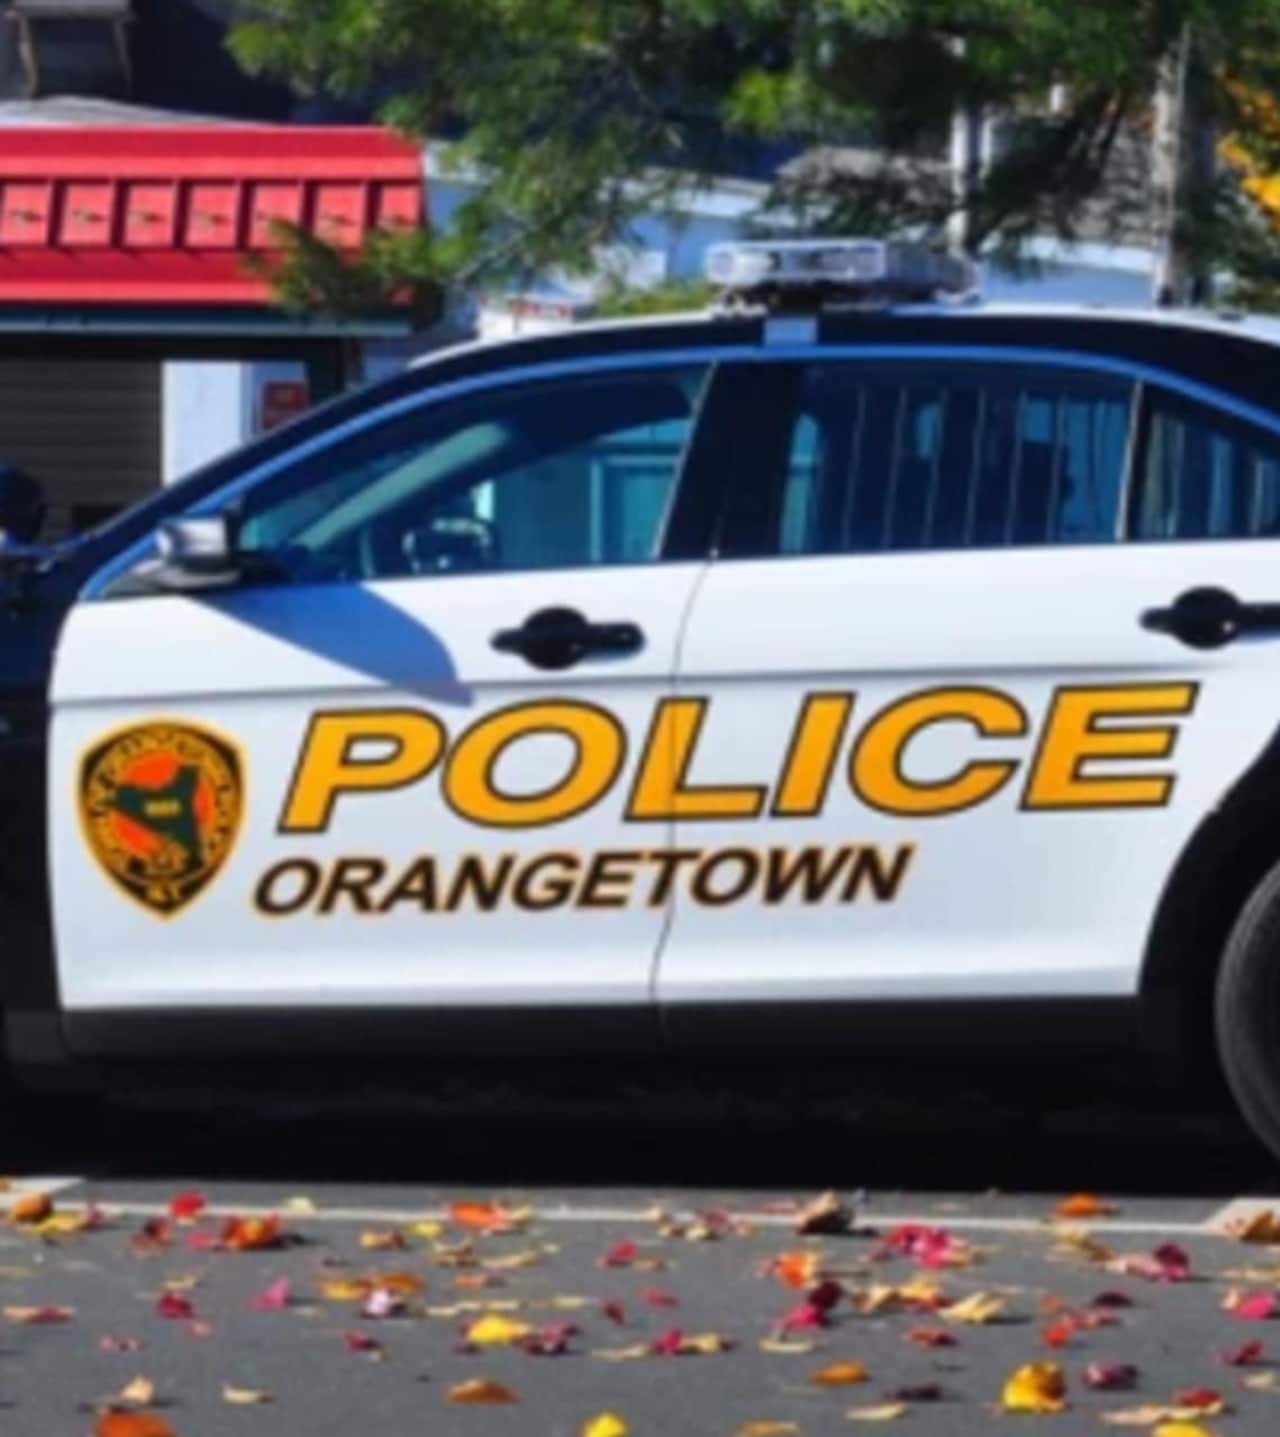 Orangetown Police arrested a Spring Valley man for sexually assaulting a girl under the age of 17 at a New Year's Eve party.